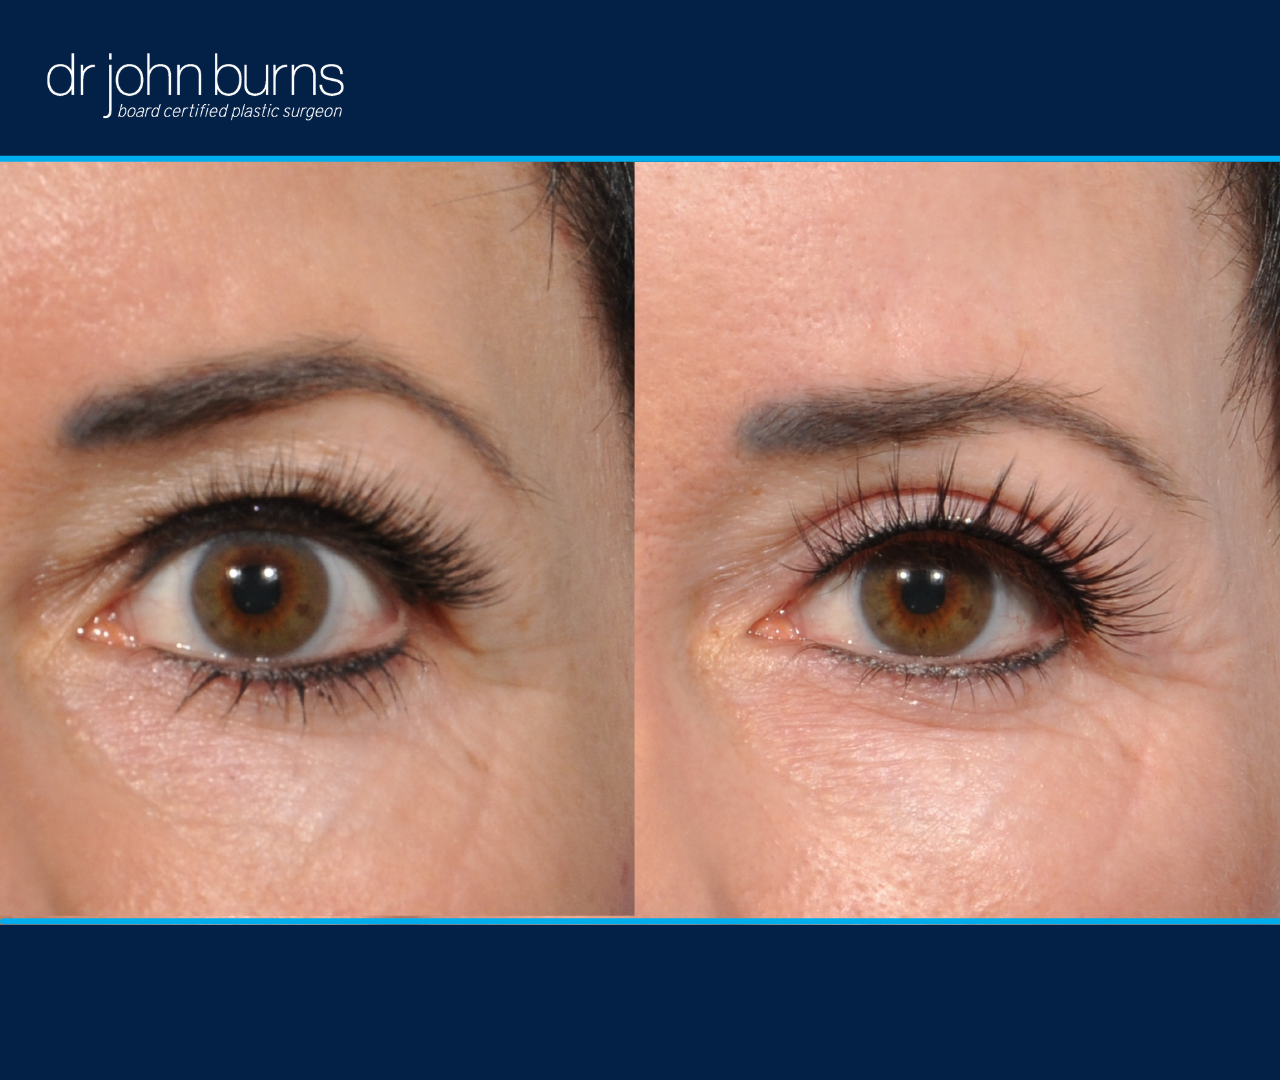 left eye view | before and after eyelid surgery results by Dr. John Burns